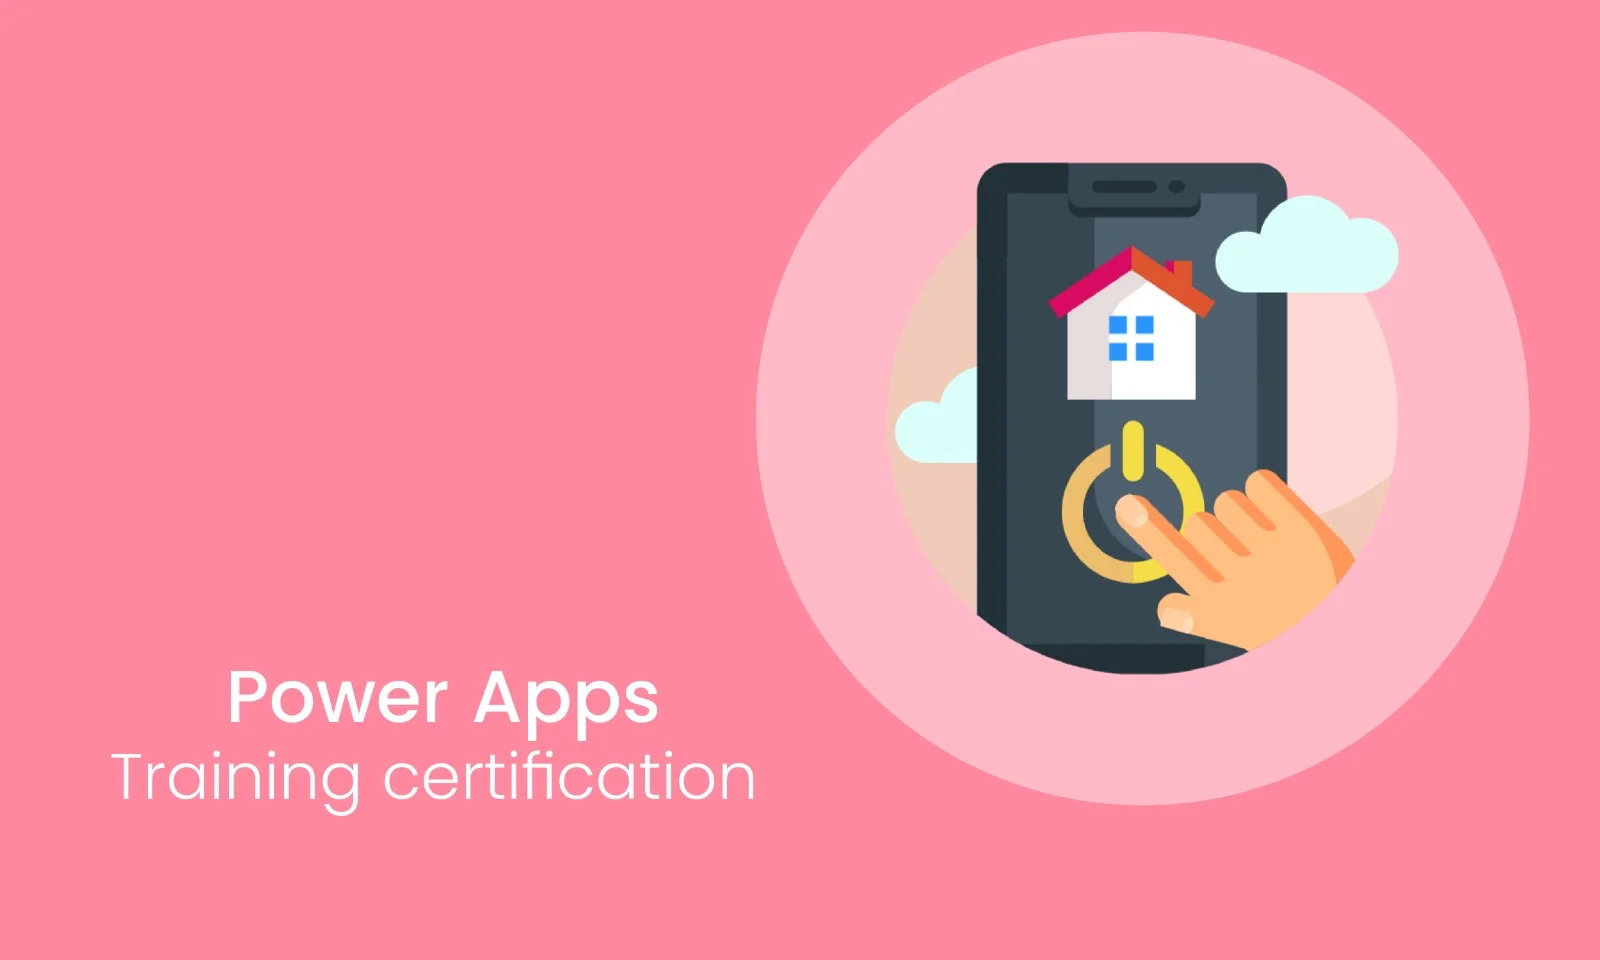 power apps course training certificate by 3Zenx